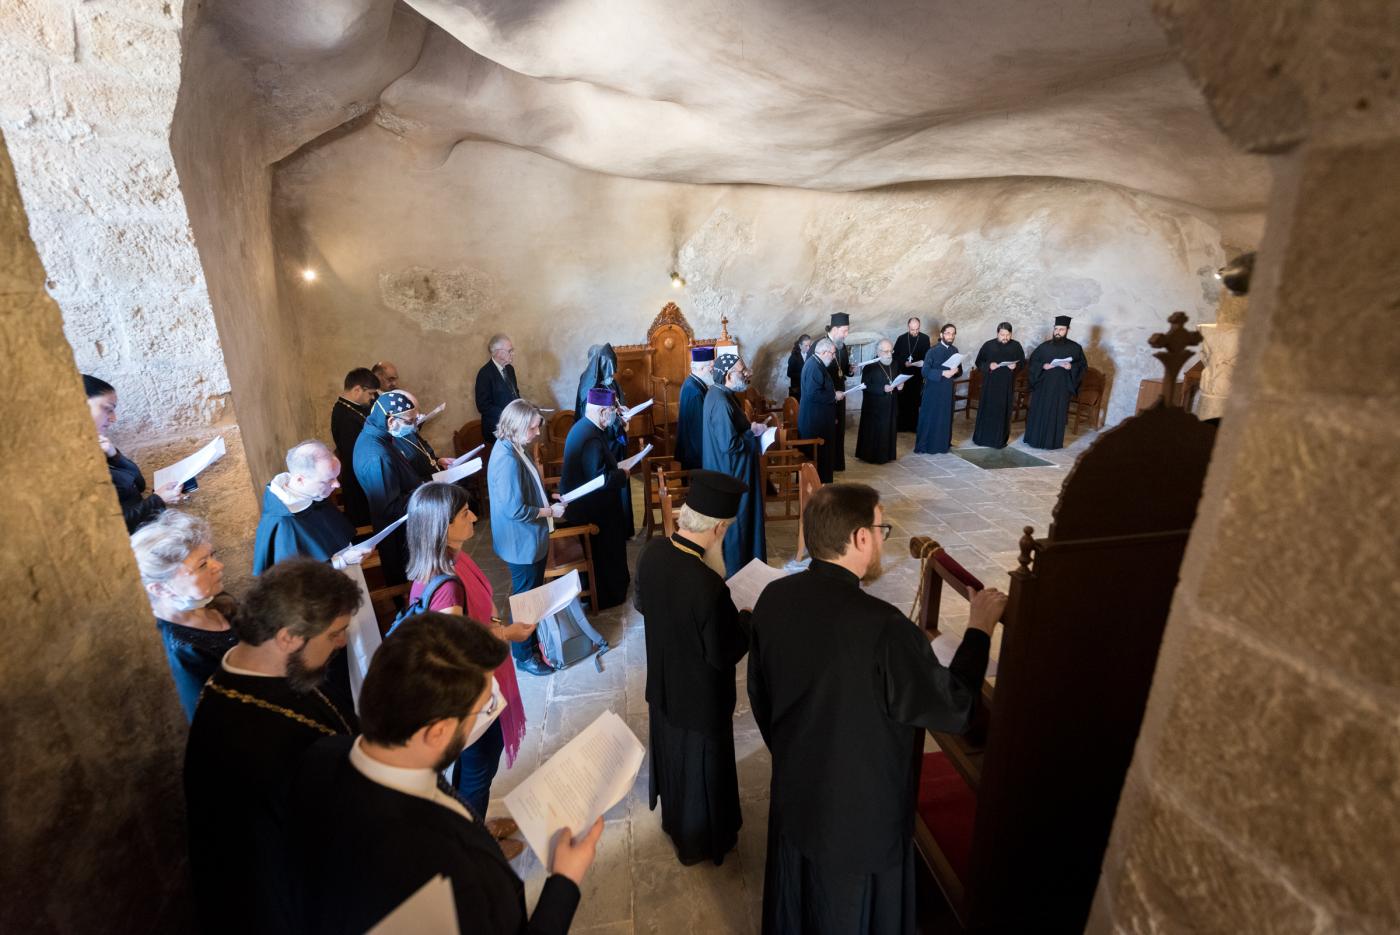 Group of people of different ages, many of them clergy wearing black religious garb, gather inside a stone wall chapel to pray. 